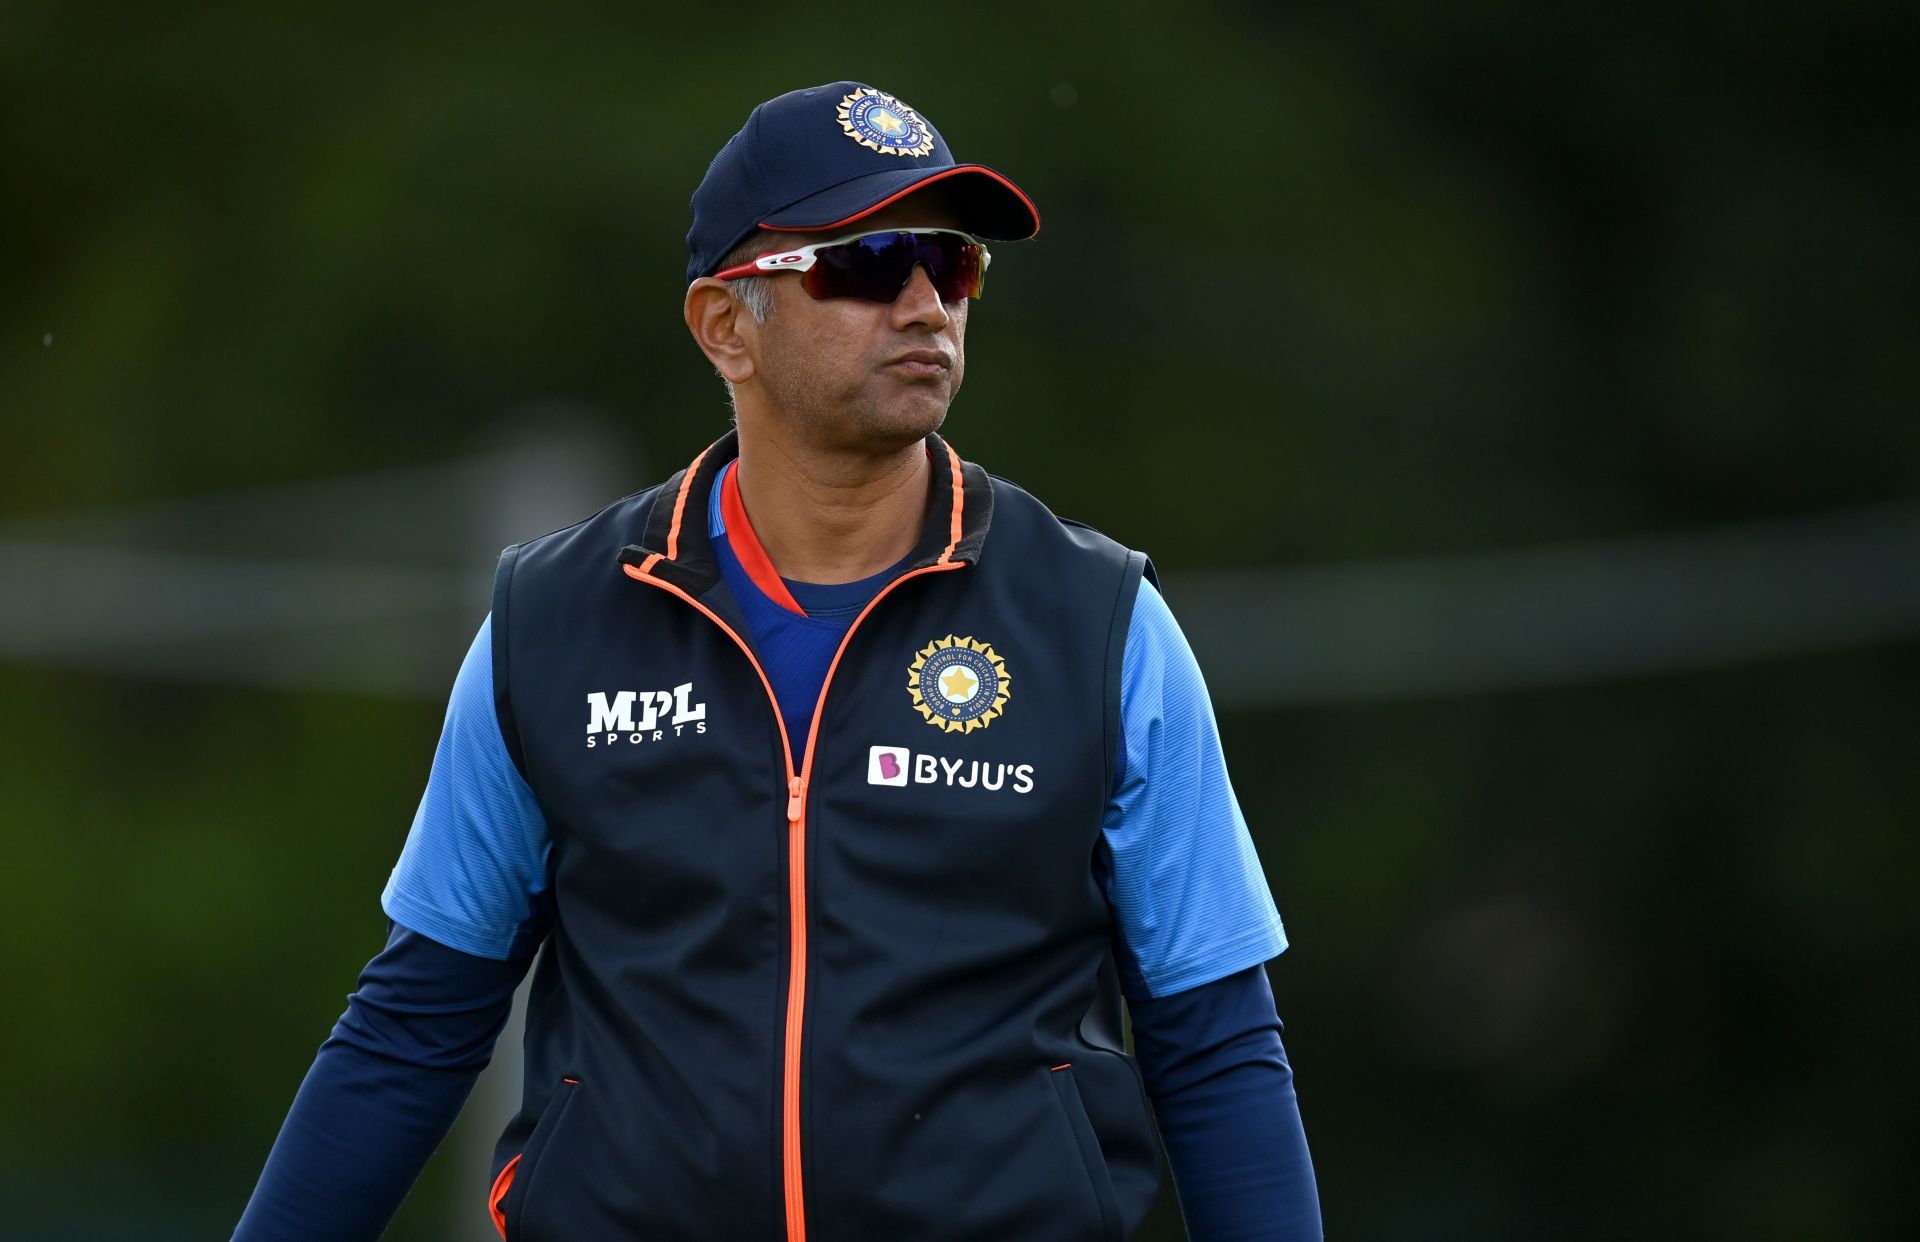 Currently the Indian head coach, Rahul Dravid was the rock of the Indian batting unit during the noughties